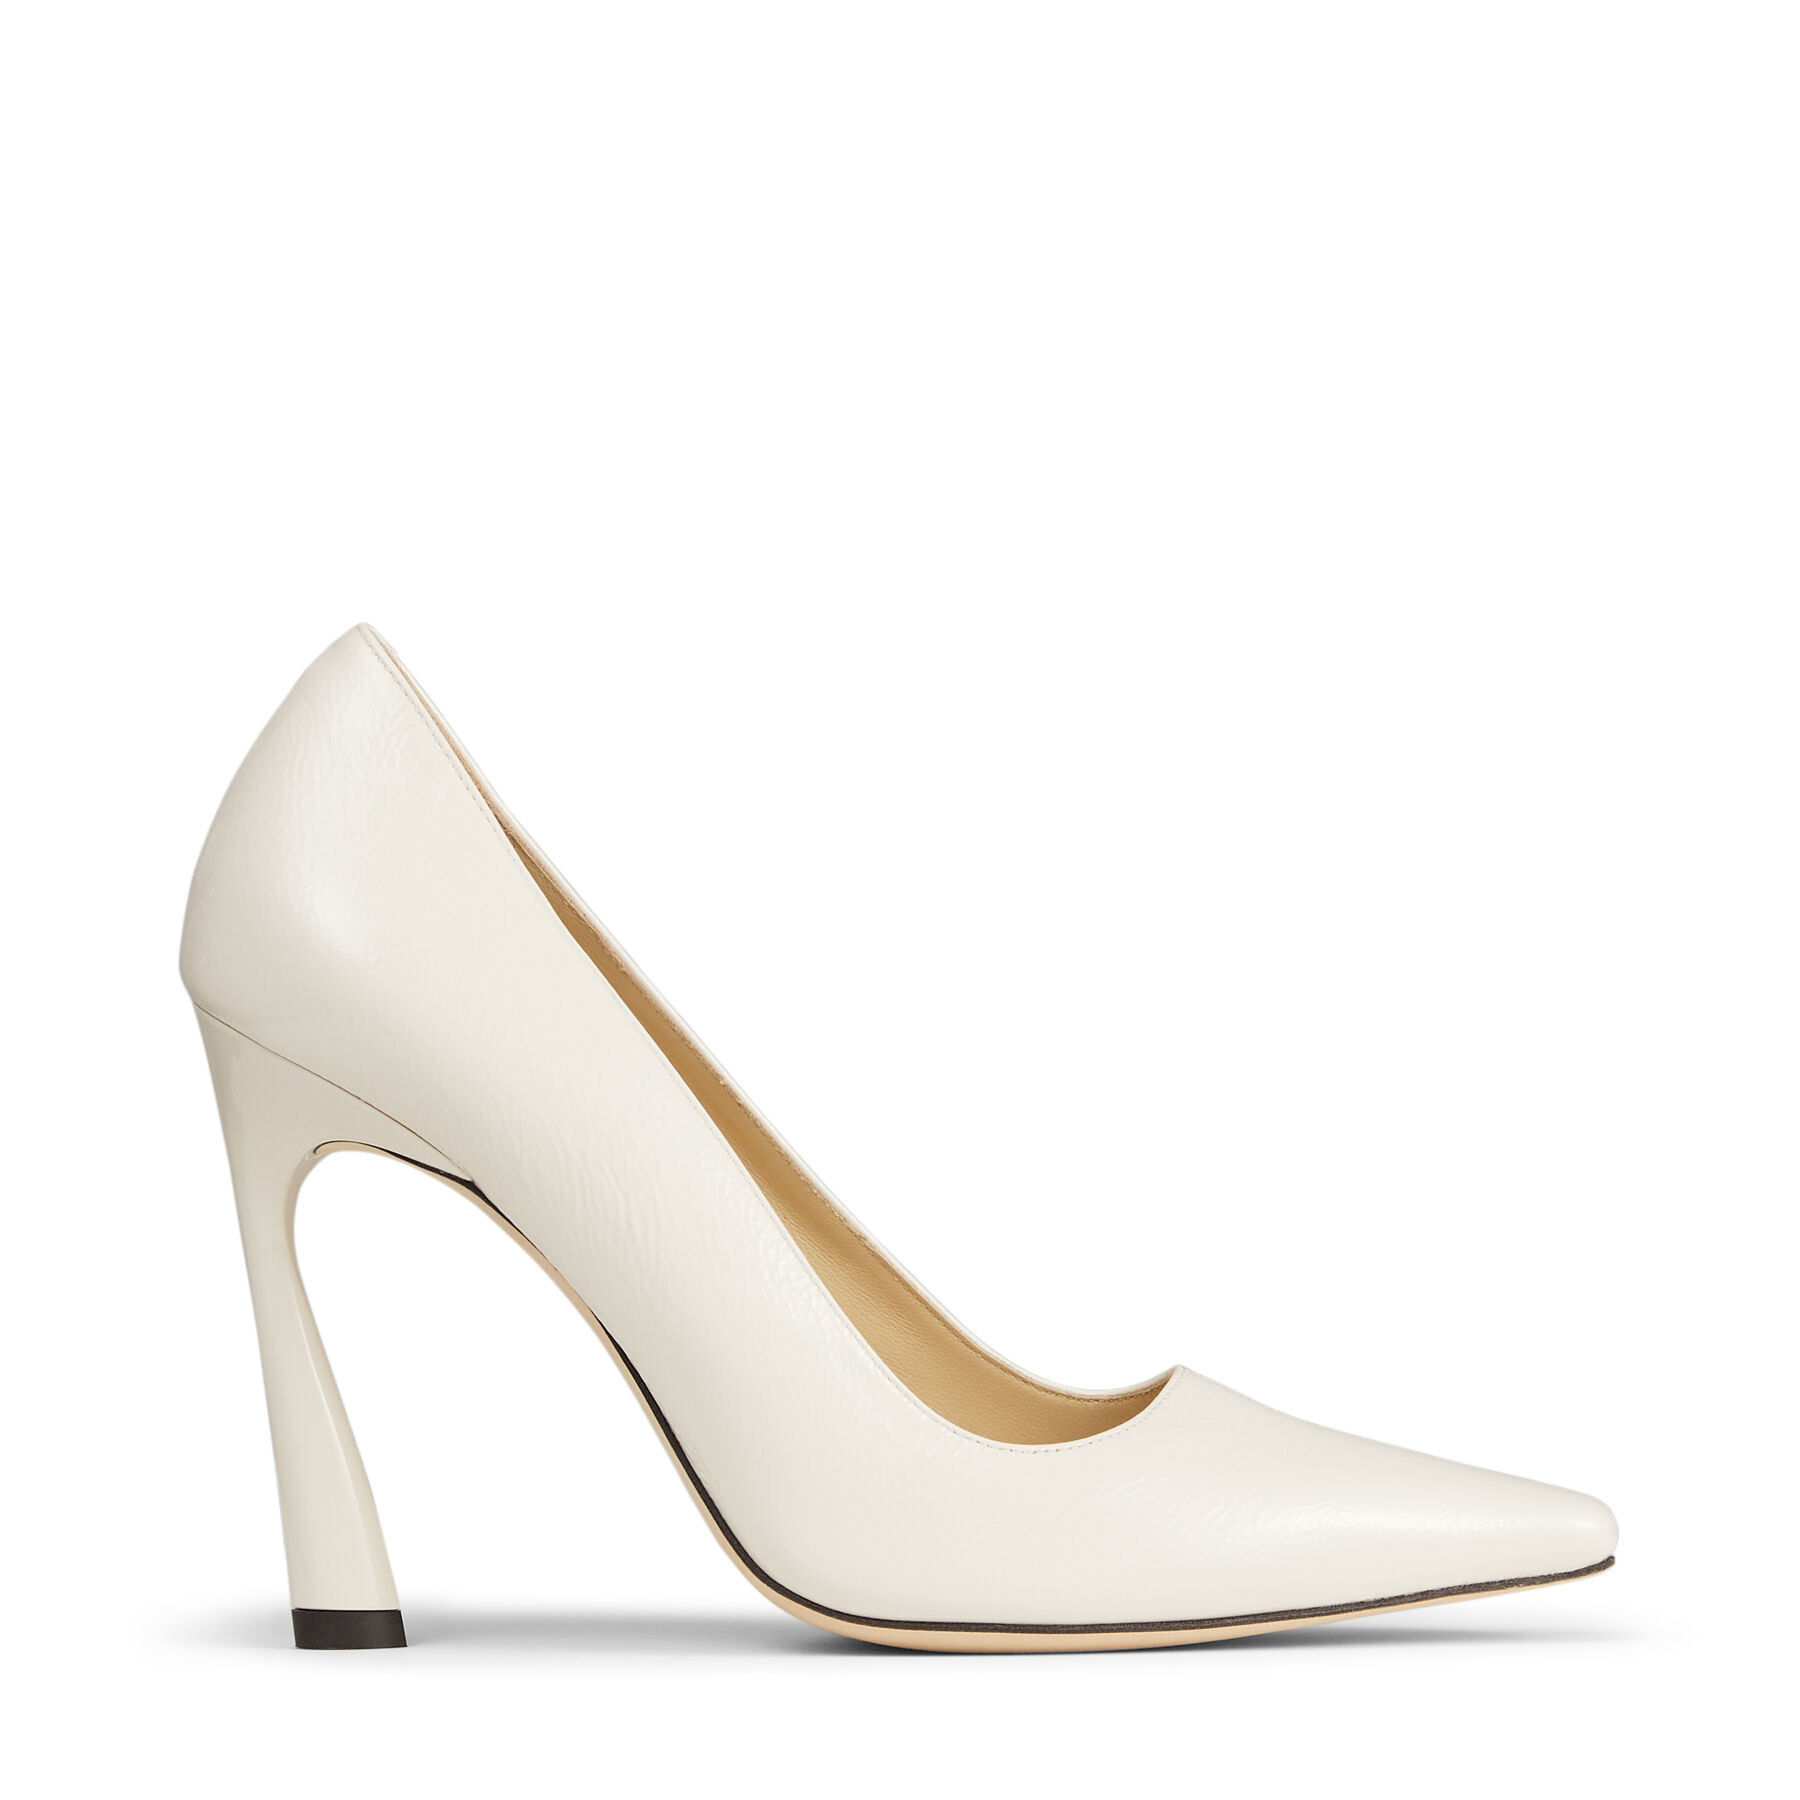 Brittany 100 Latte Naplack Pumps with Angled Heel